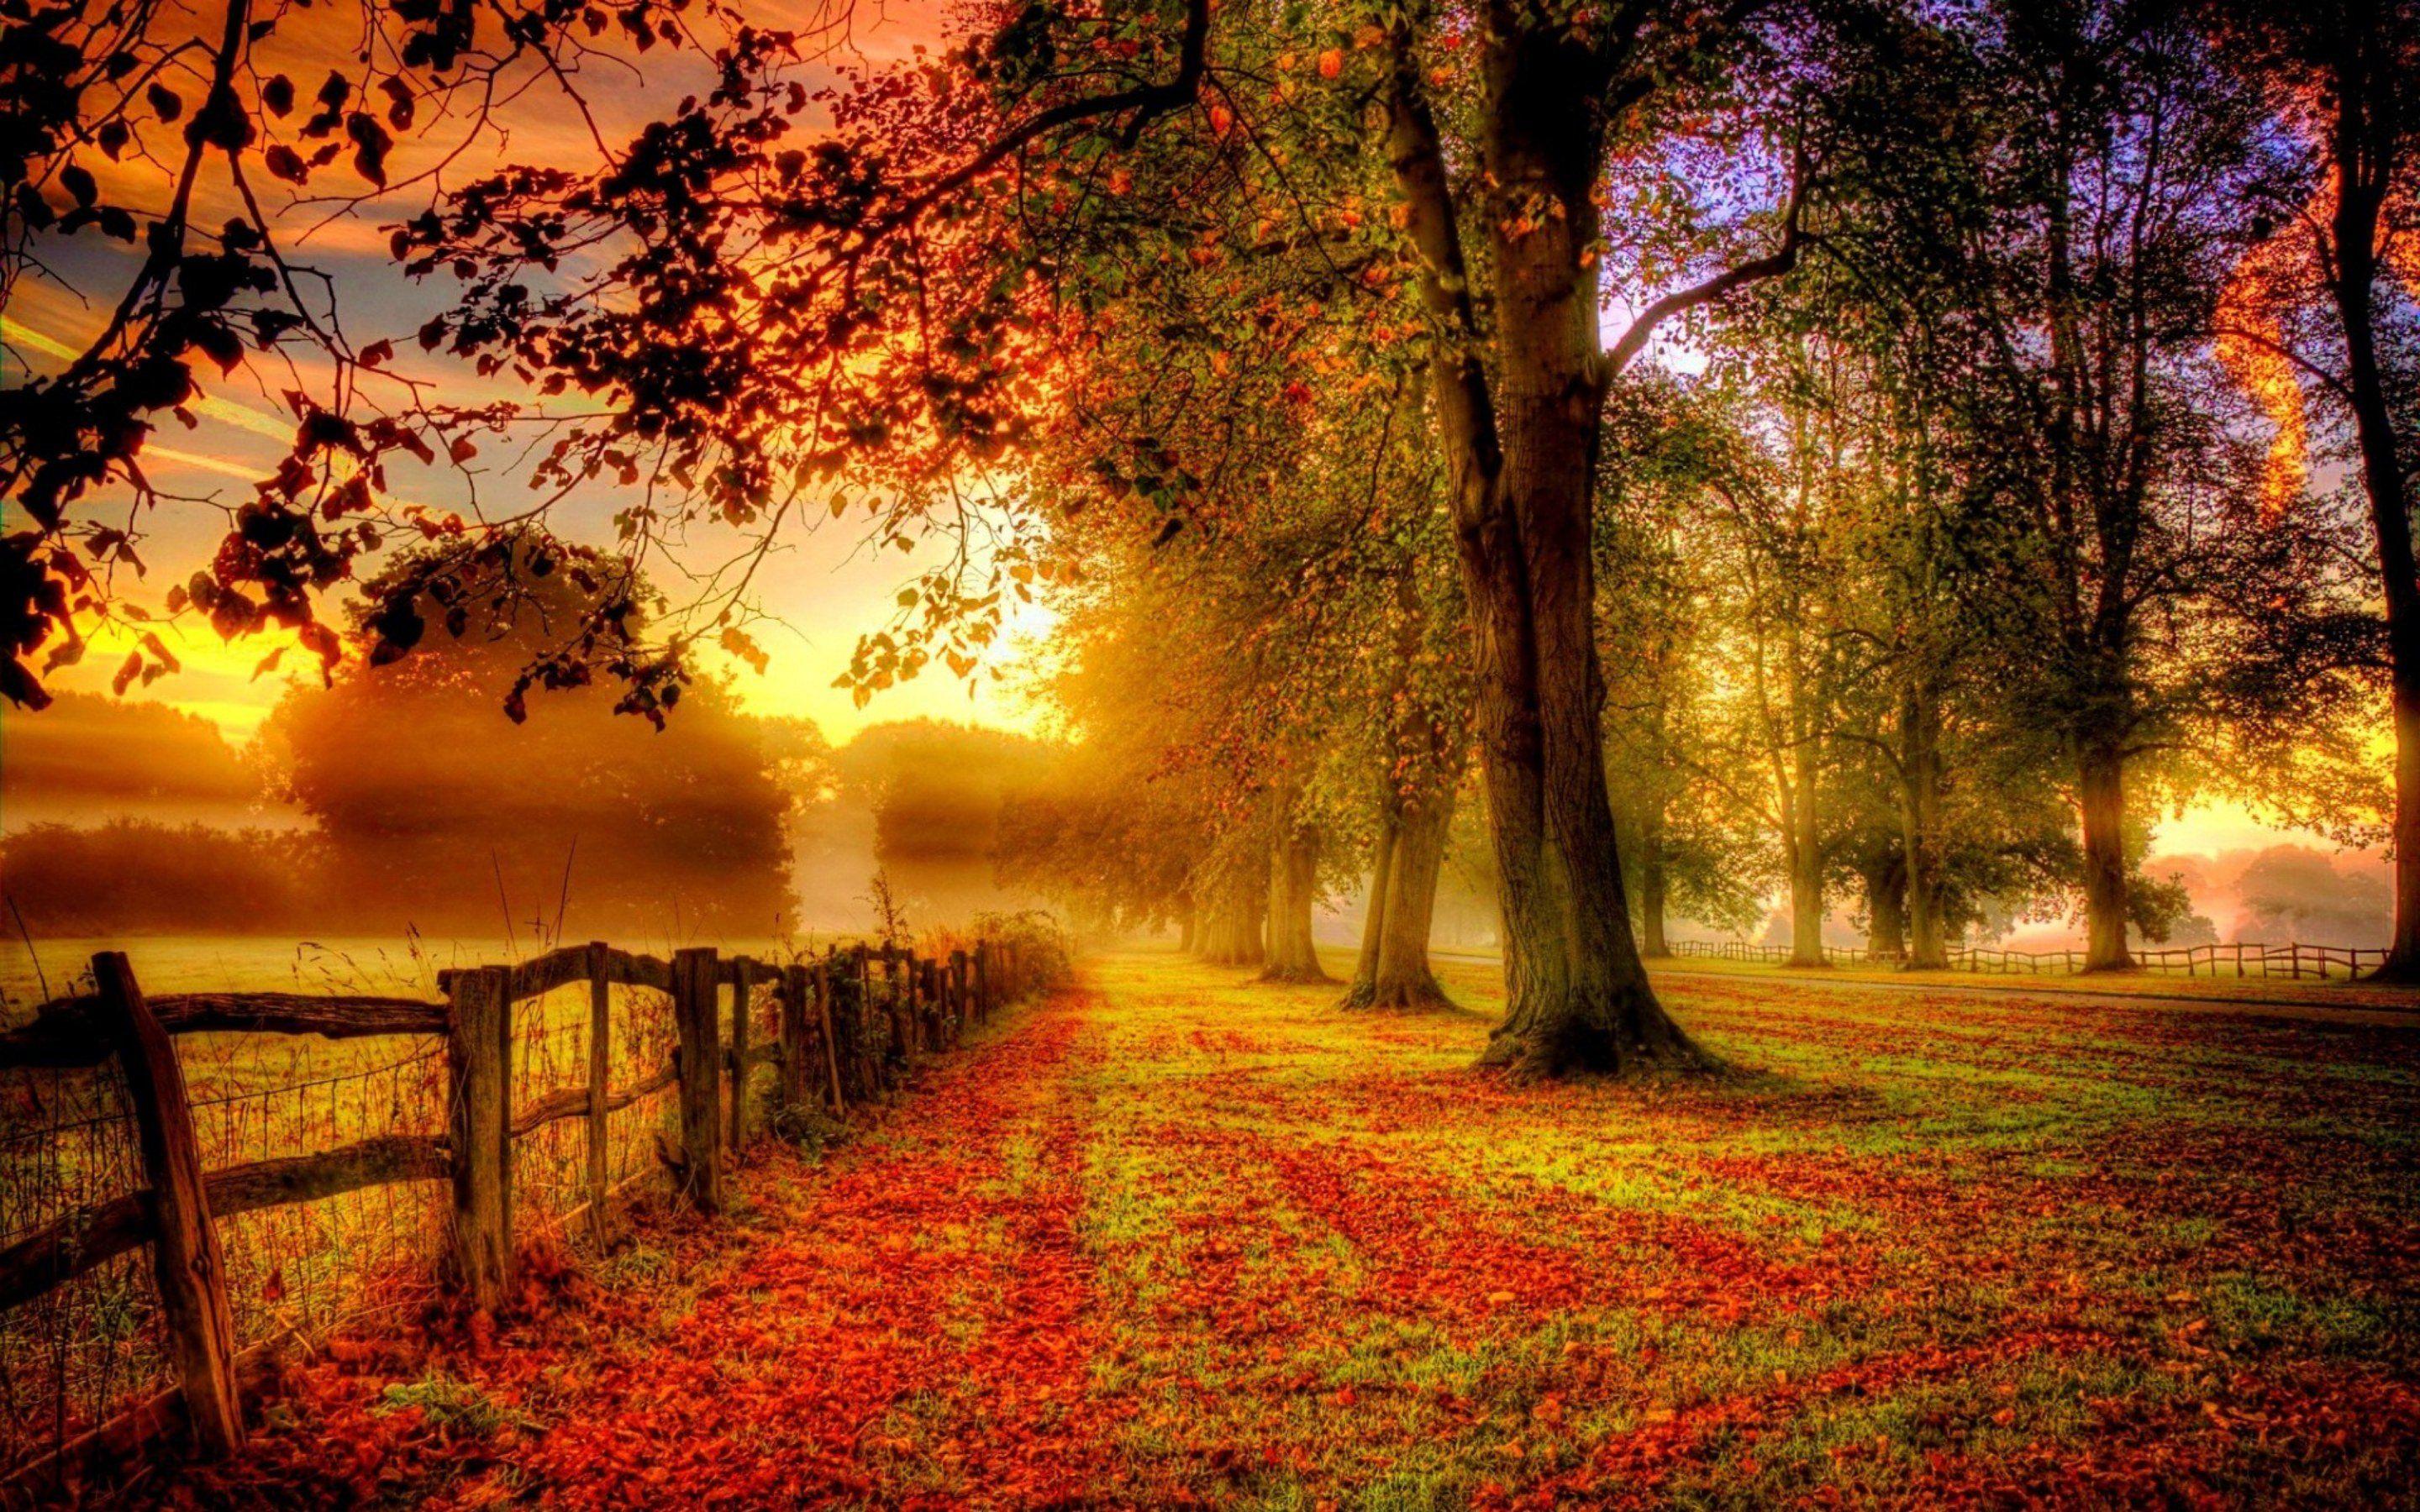 Country Sunset Road Download Free  Banner Background Image on Lovepik   401625270